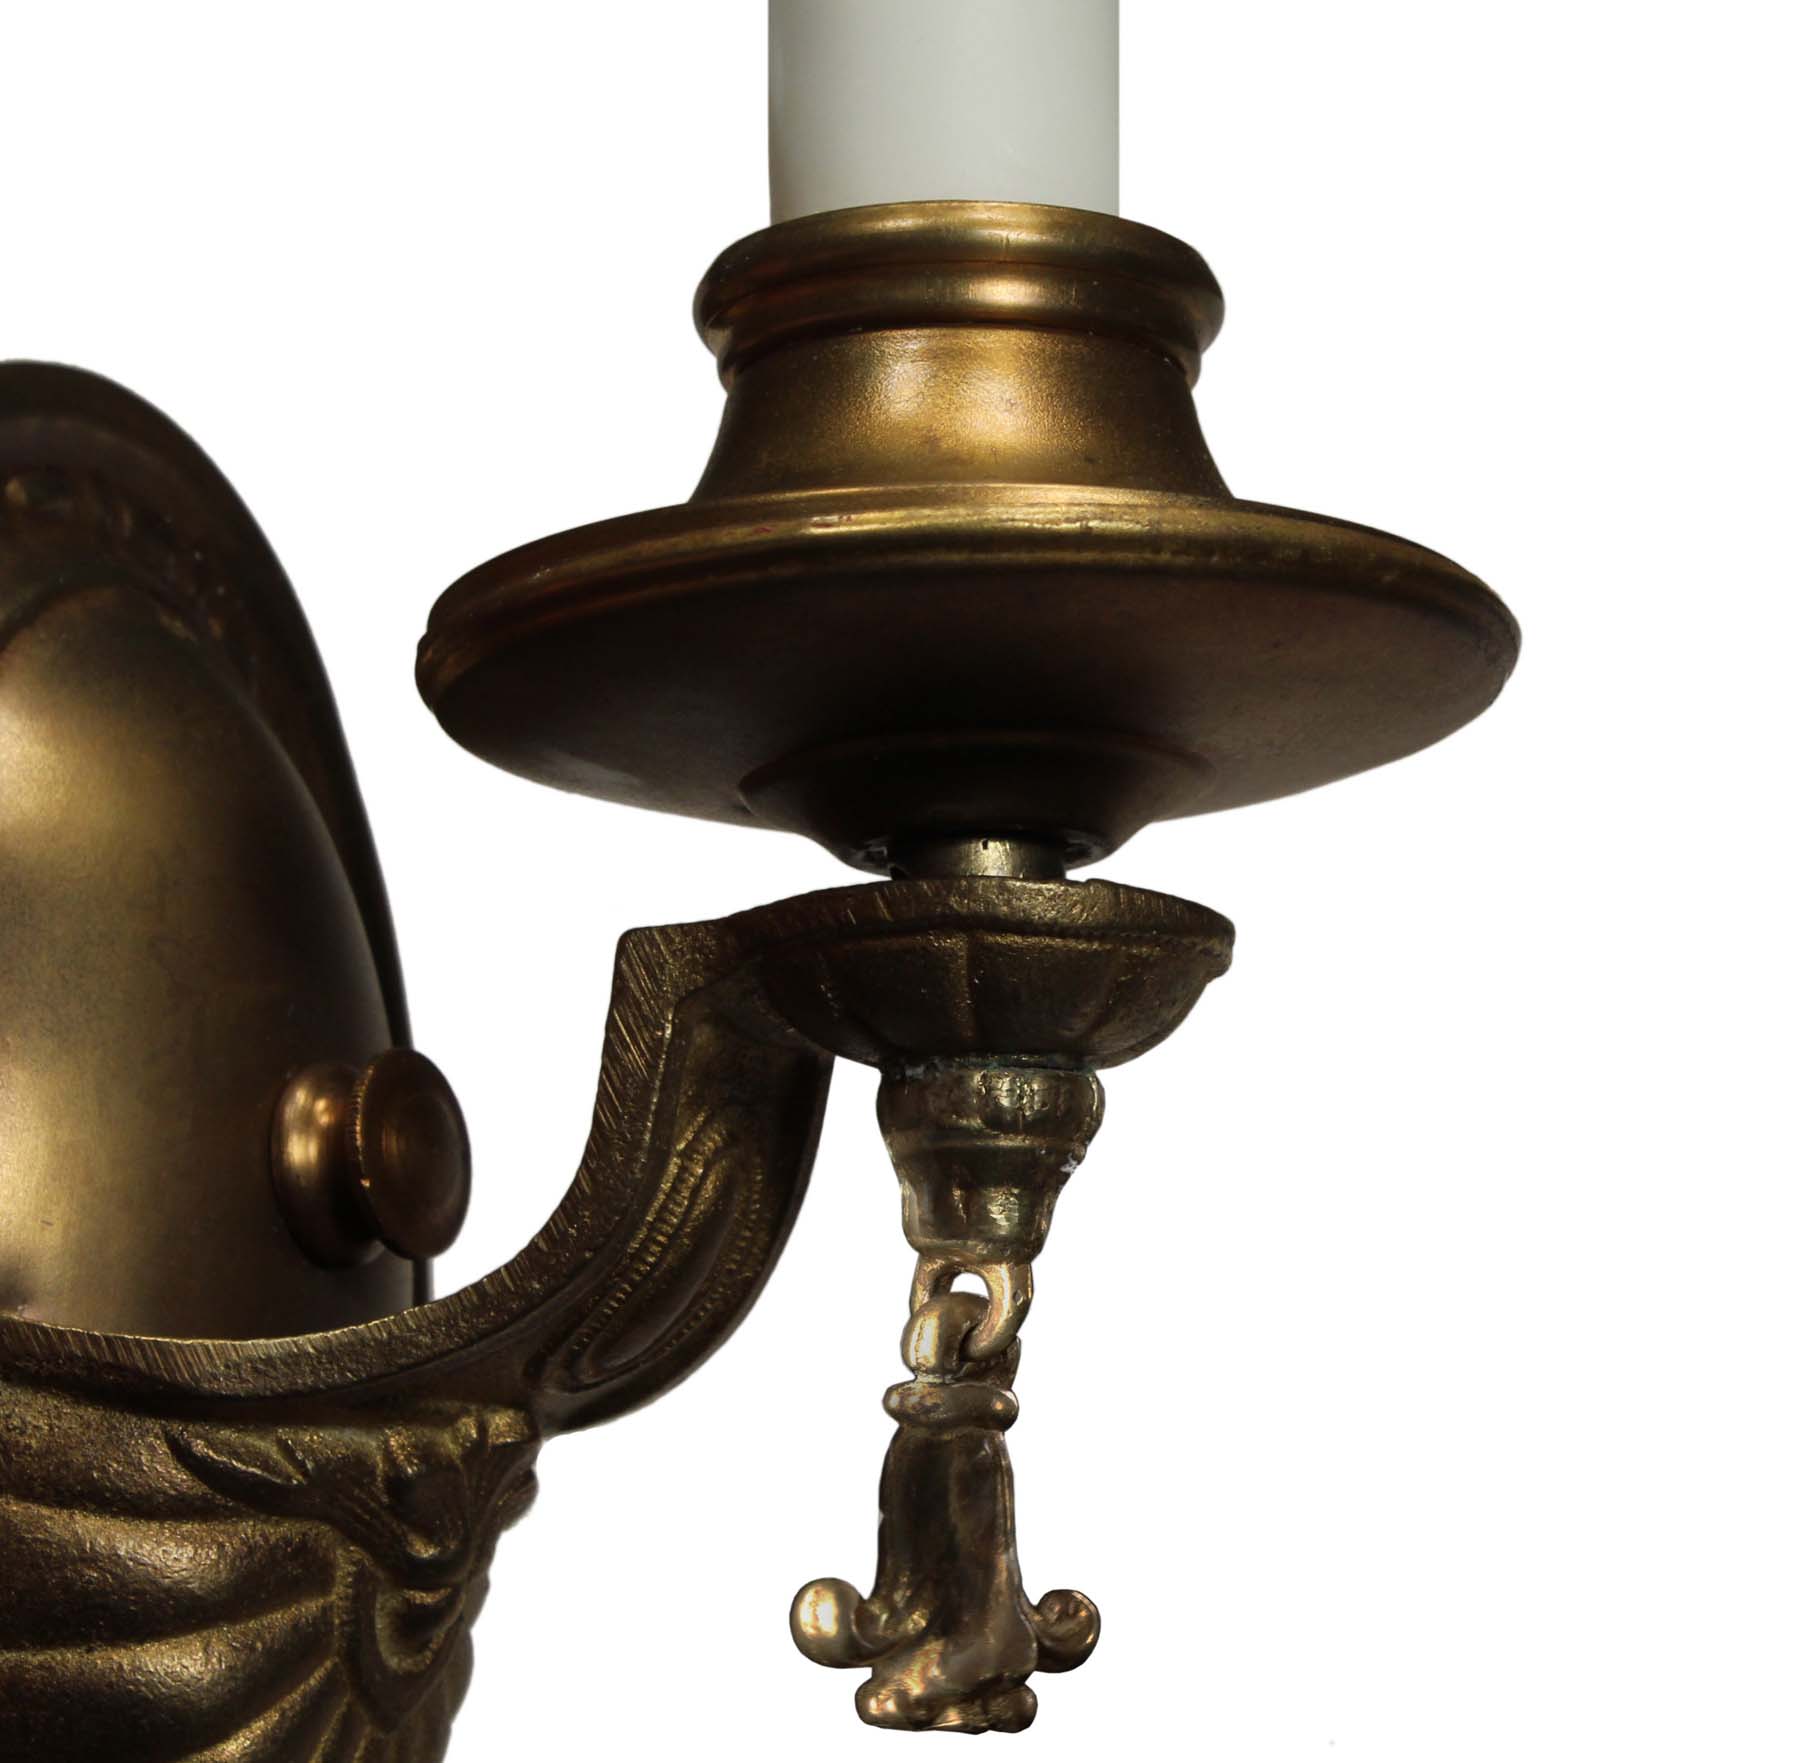 SOLD Pair of Antique Brass Neoclassical Sconces, c. 1920-68326